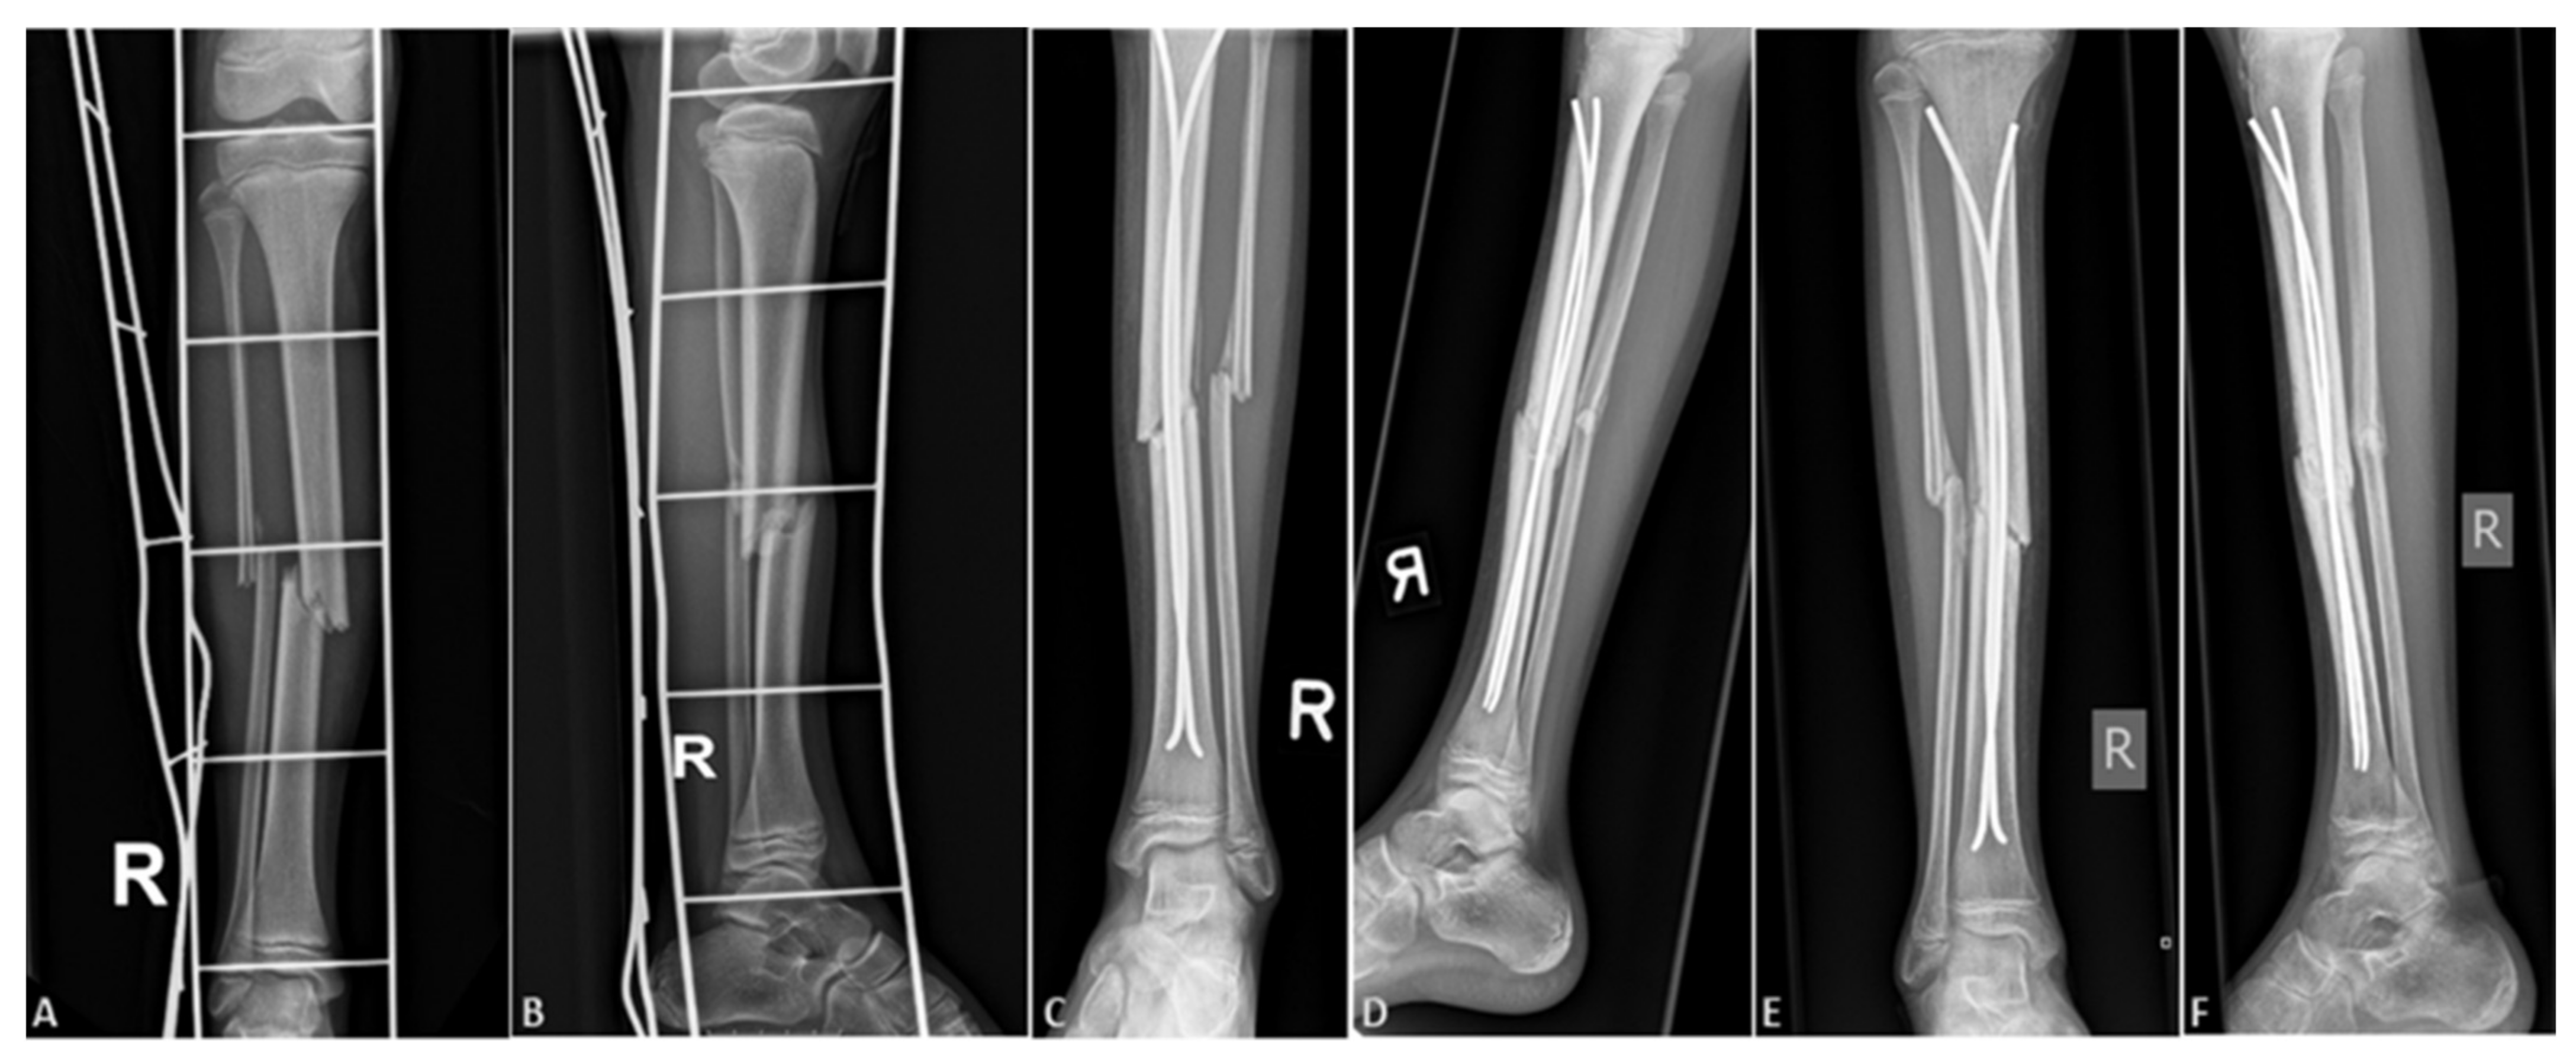 Children | Free Full-Text | Elastic Stable Intramedullary Nailing for  Treatment of Pediatric Tibial Fractures: A 20-Year Single Center Experience  of 132 Cases